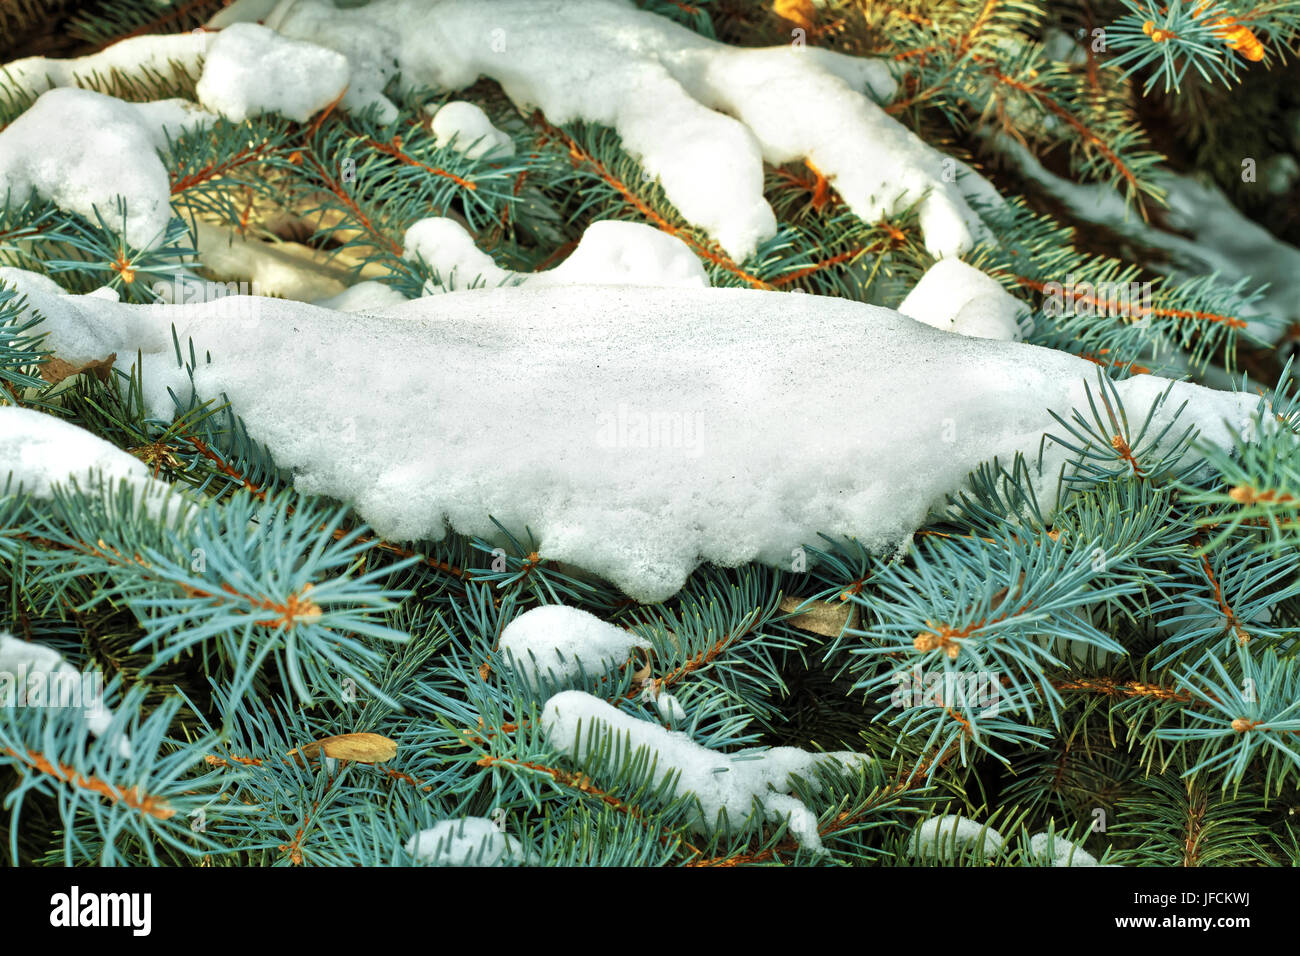 Snow on spruce branches Stock Photo